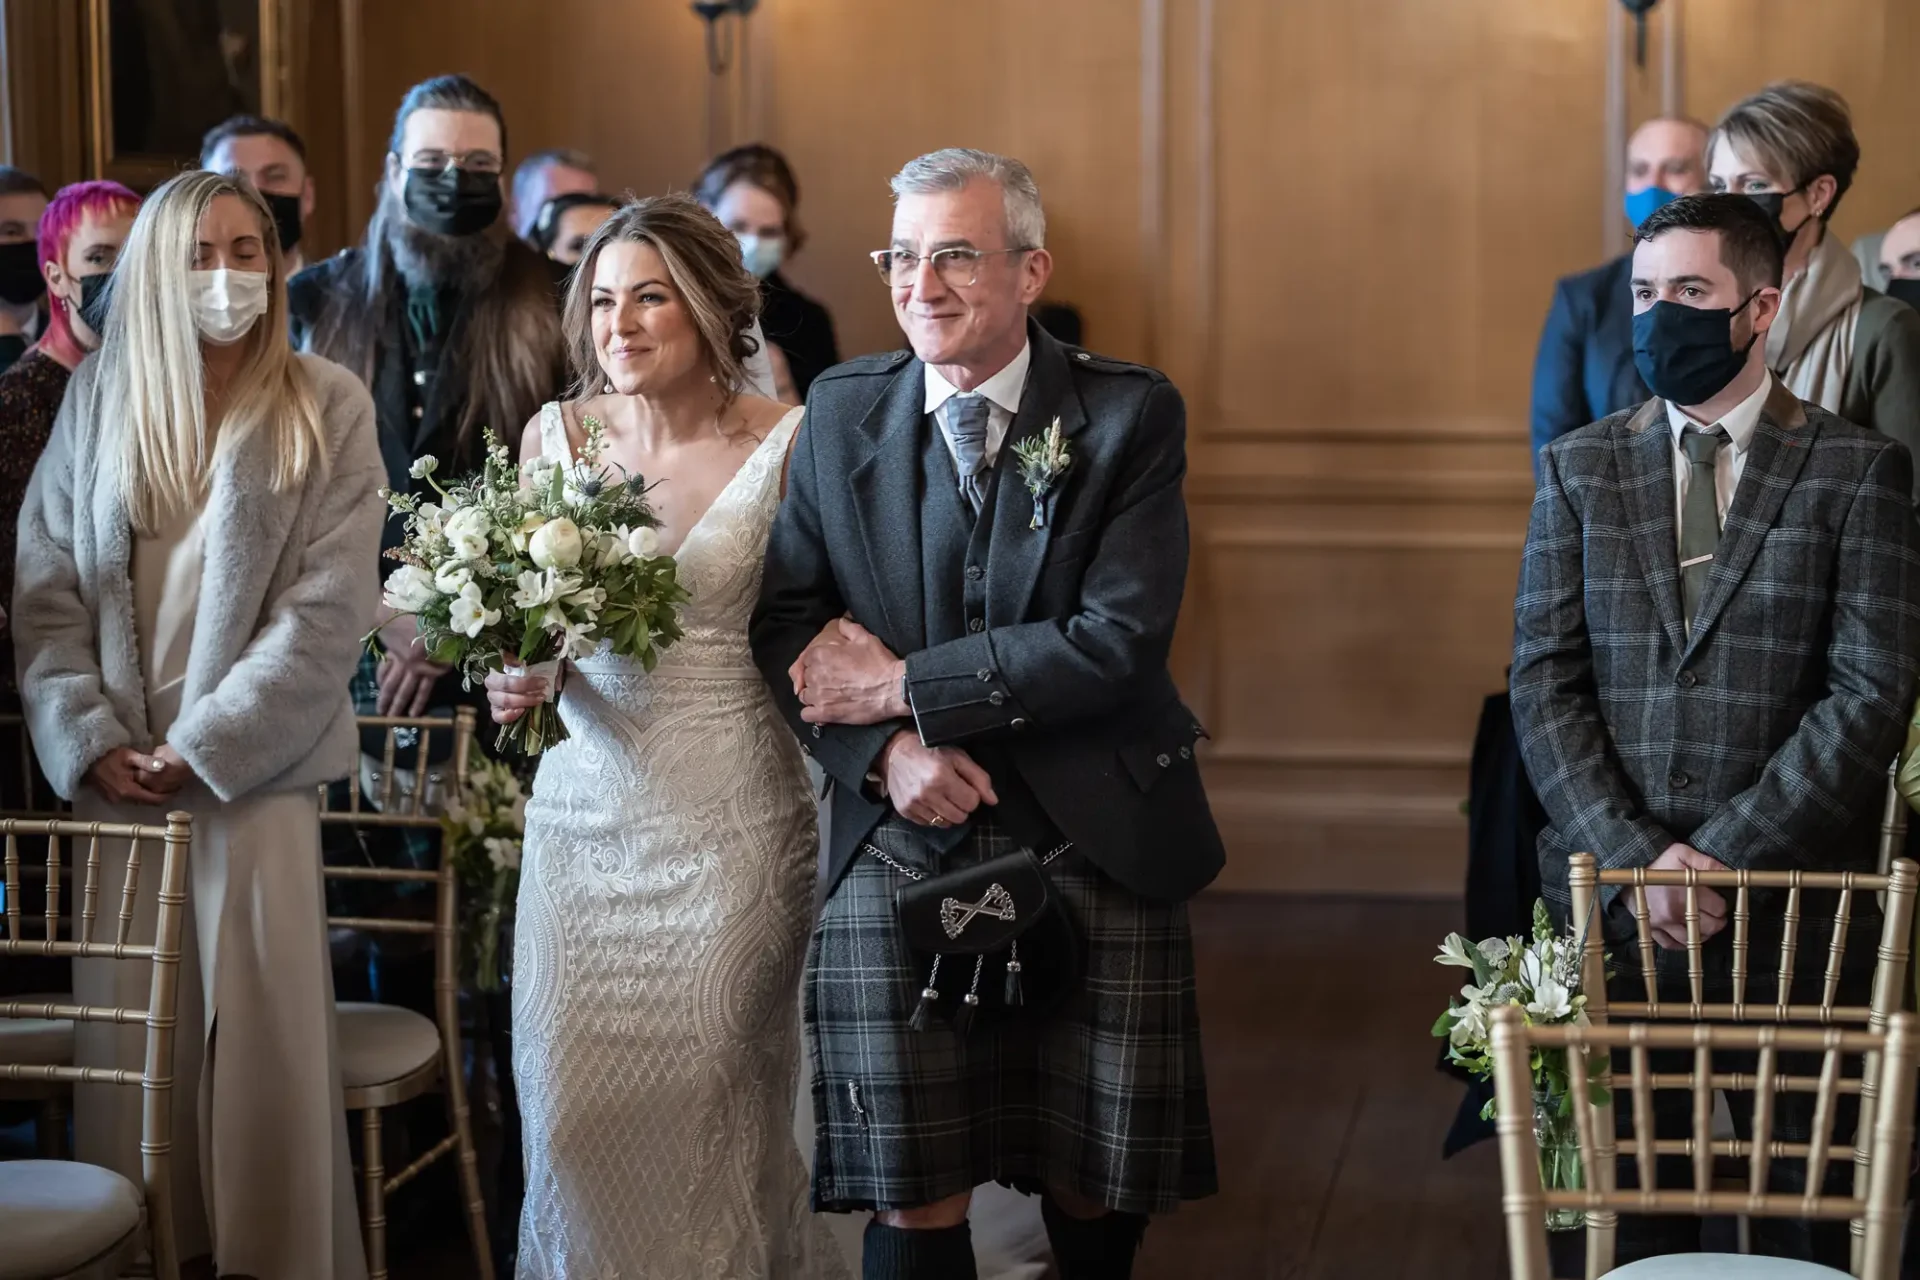 Bride in a lace dress walking down the aisle with an older man in a kilt, surrounded by guests wearing masks.